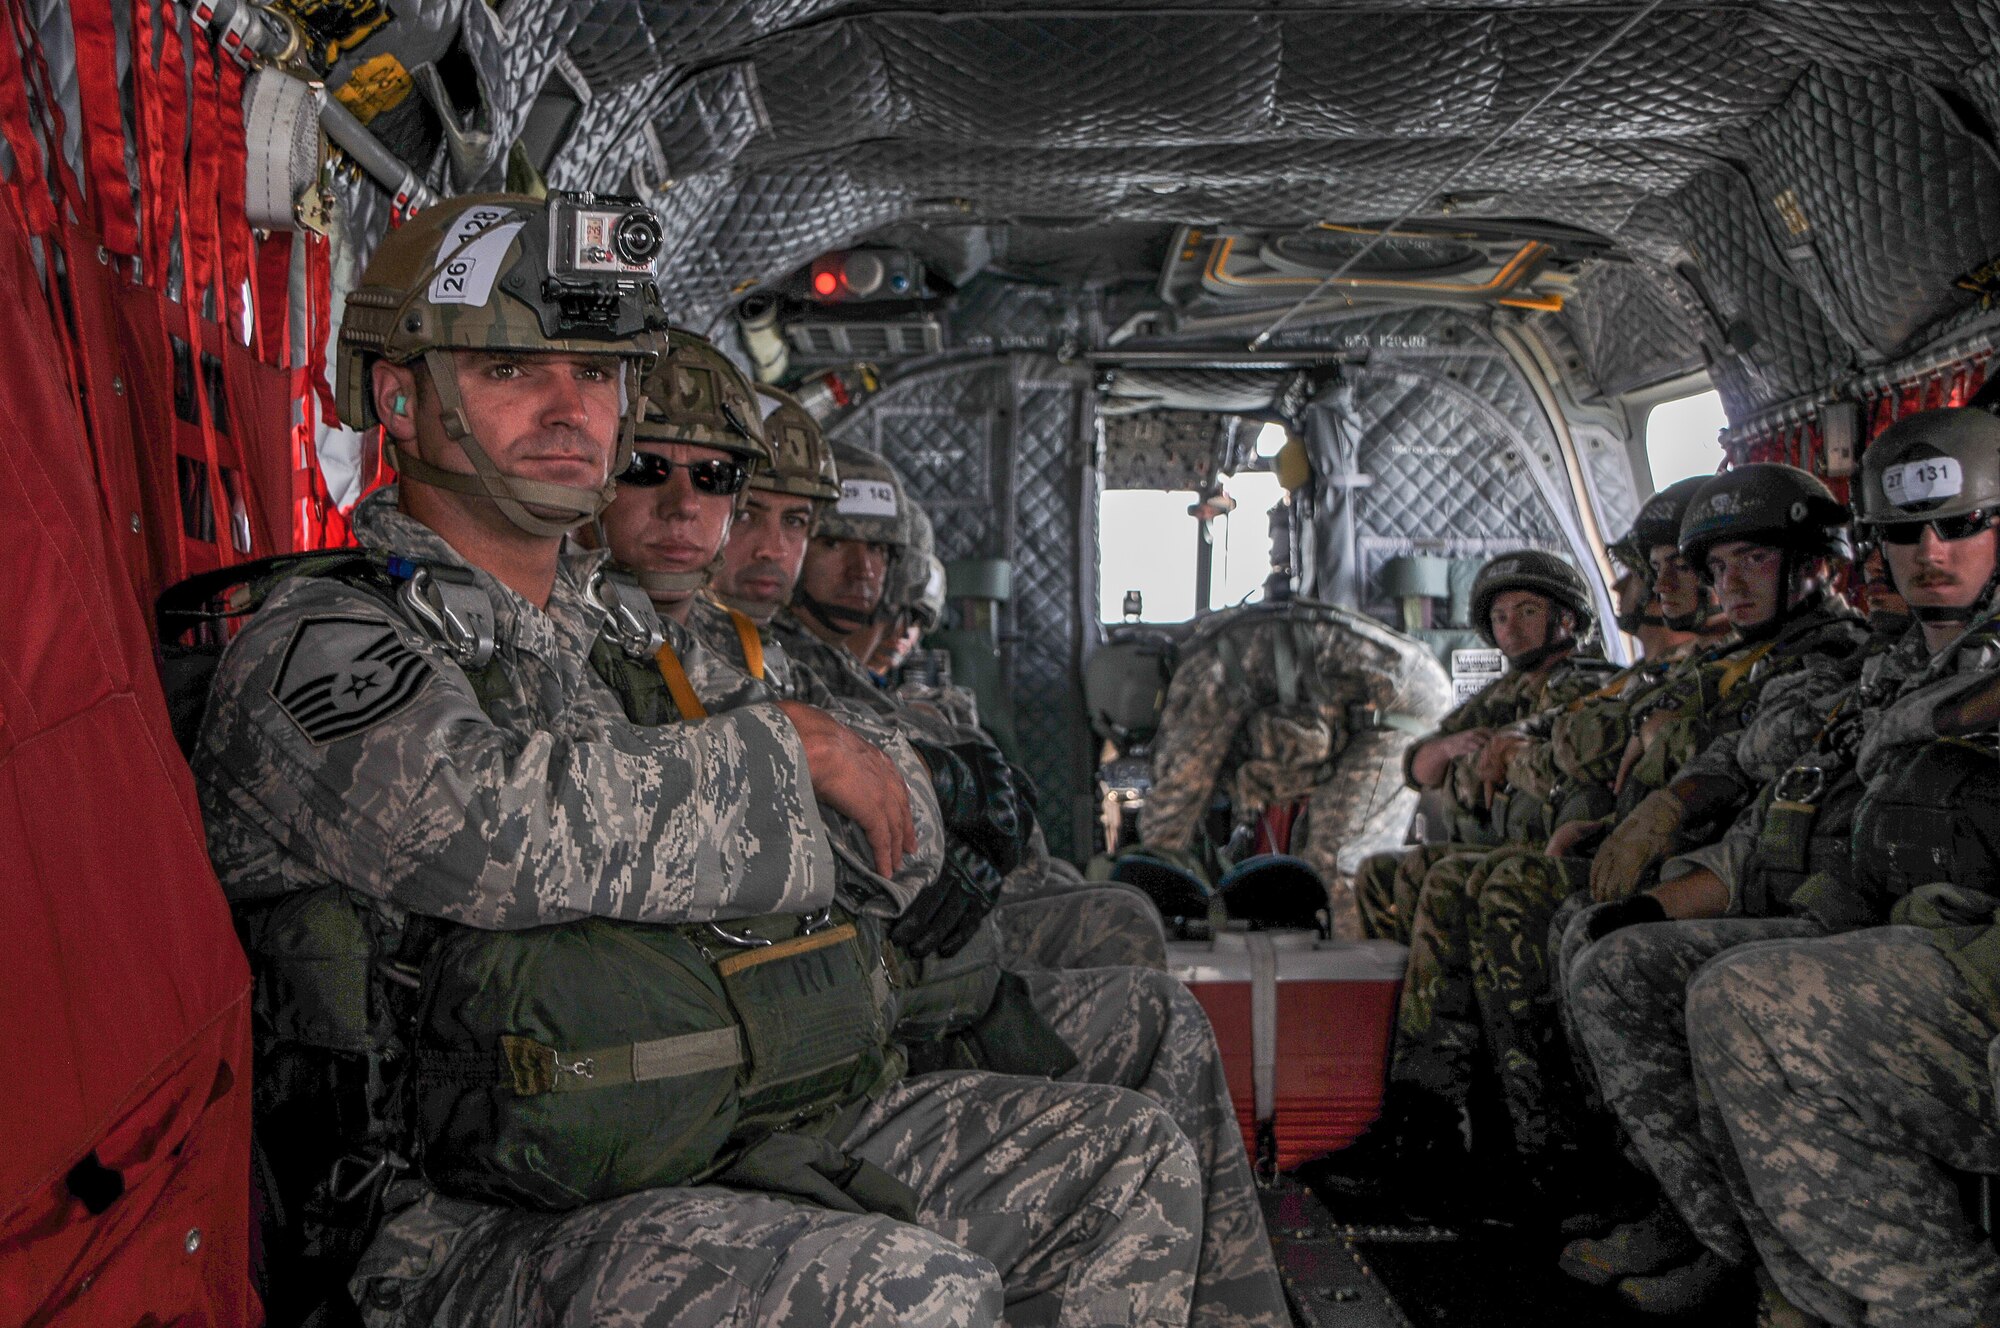 National Guard Master Sgt. Ryan Baker, National Guard Senior Master Sgt. A.J. Freshwater, and National Guard Capt. Roger Brooks wait onboard a CH-47 Chinook Helicopter during Leapfest 30, Aug. 3, 2012 in Kingston, RI. Baker, Freshwater, and Brooks are part of a four man parachuting team from the 165th Air Support Operation Squadron in Savannah, Ga. (National Guard photo by Staff Sgt. Monica Eusebio/released)